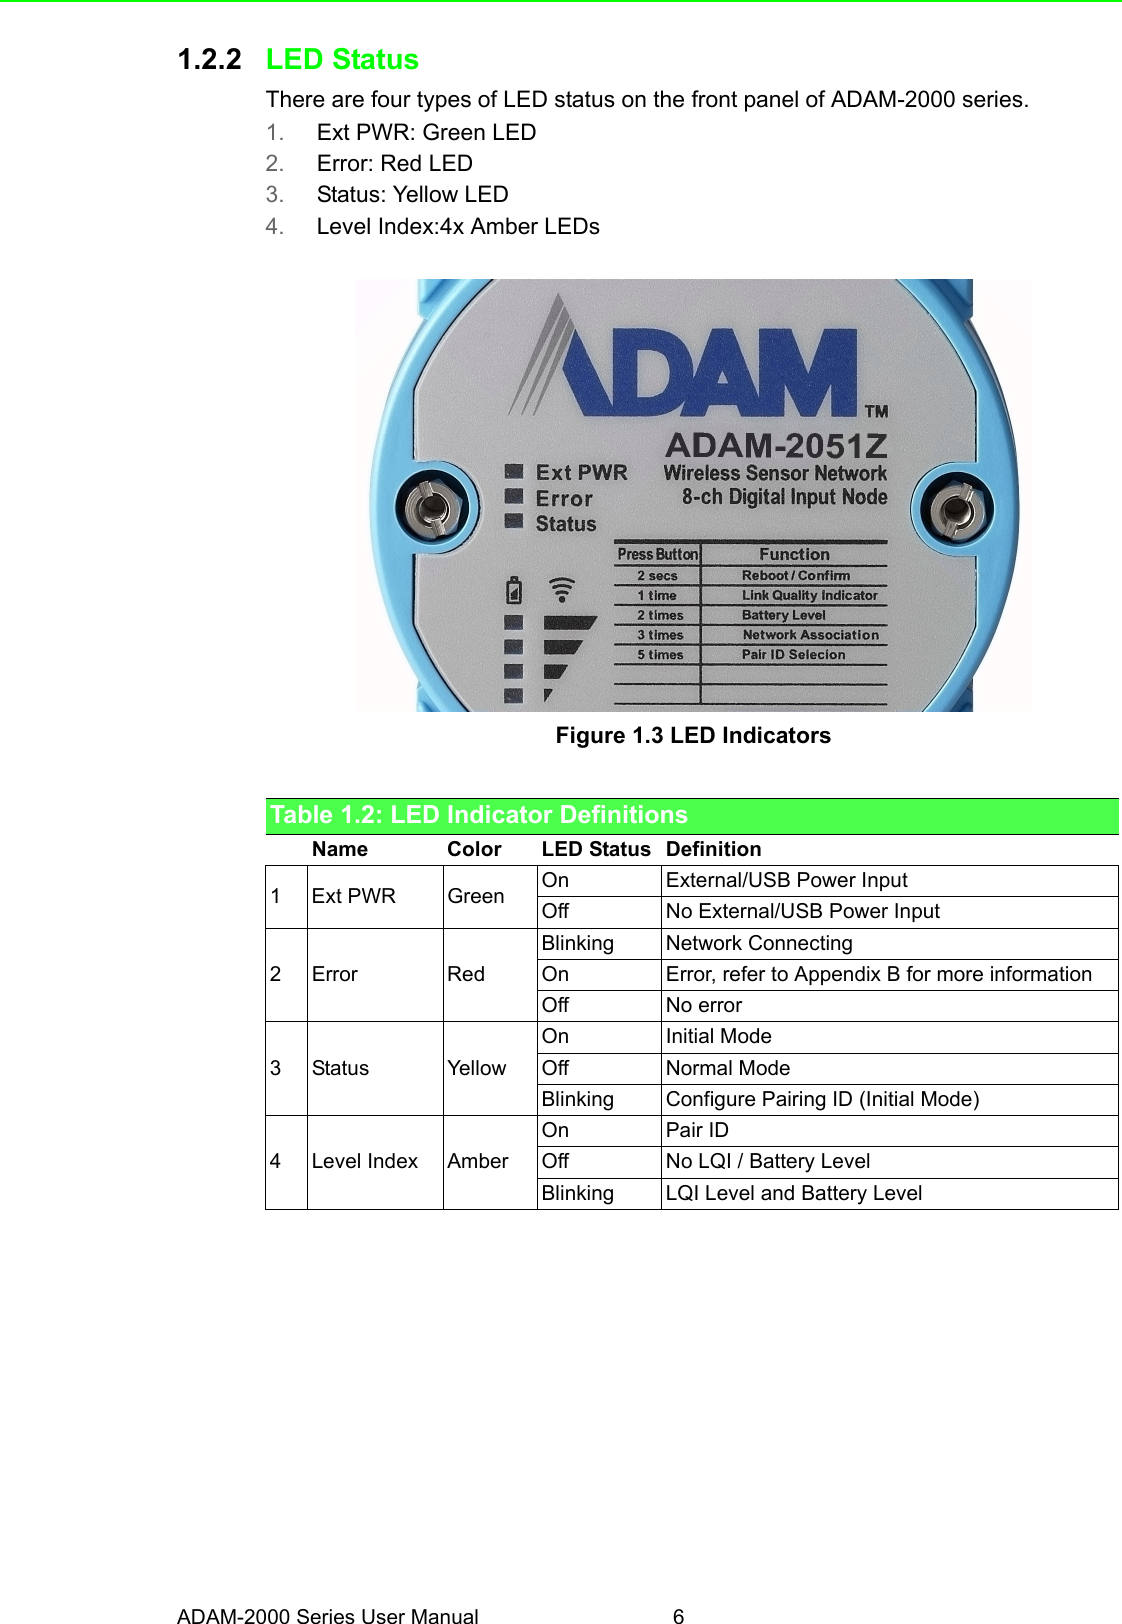 ADAM-2000 Series User Manual 61.2.2 LED StatusThere are four types of LED status on the front panel of ADAM-2000 series.1. Ext PWR: Green LED2. Error: Red LED3. Status: Yellow LED4. Level Index:4x Amber LEDsFigure 1.3 LED IndicatorsTable 1.2: LED Indicator DefinitionsName Color LED Status Definition1Ext PWR Green On External/USB Power InputOff No External/USB Power Input2Error RedBlinking Network ConnectingOn Error, refer to Appendix B for more informationOff No error3 Status YellowOn Initial ModeOff Normal ModeBlinking Configure Pairing ID (Initial Mode)4 Level Index AmberOn Pair IDOff No LQI / Battery LevelBlinking LQI Level and Battery Level